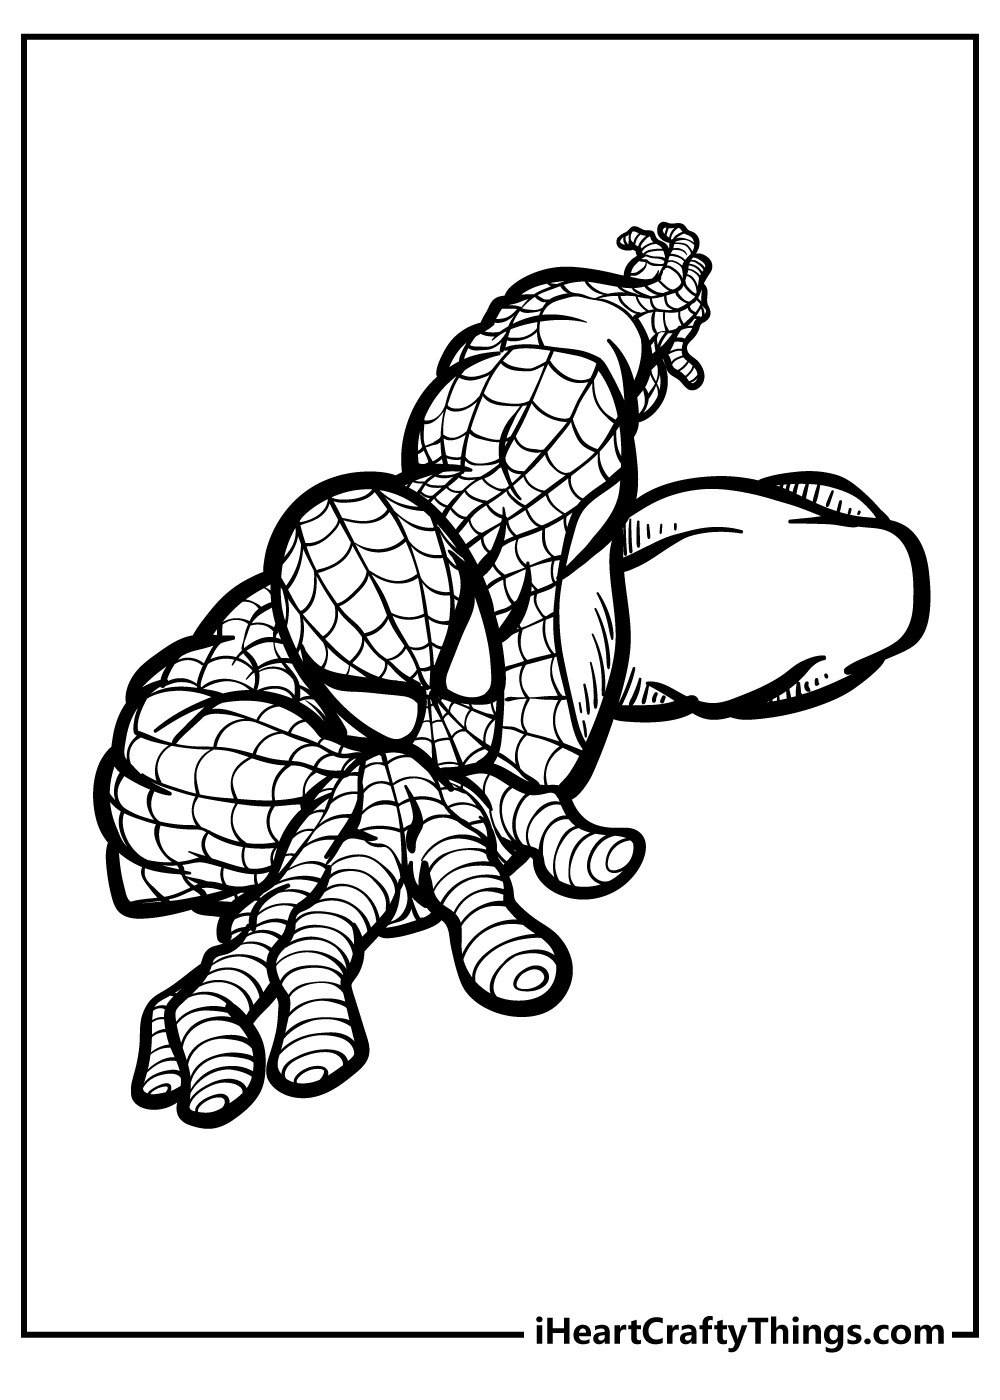 Spider-Man Coloring Pages free pdf download